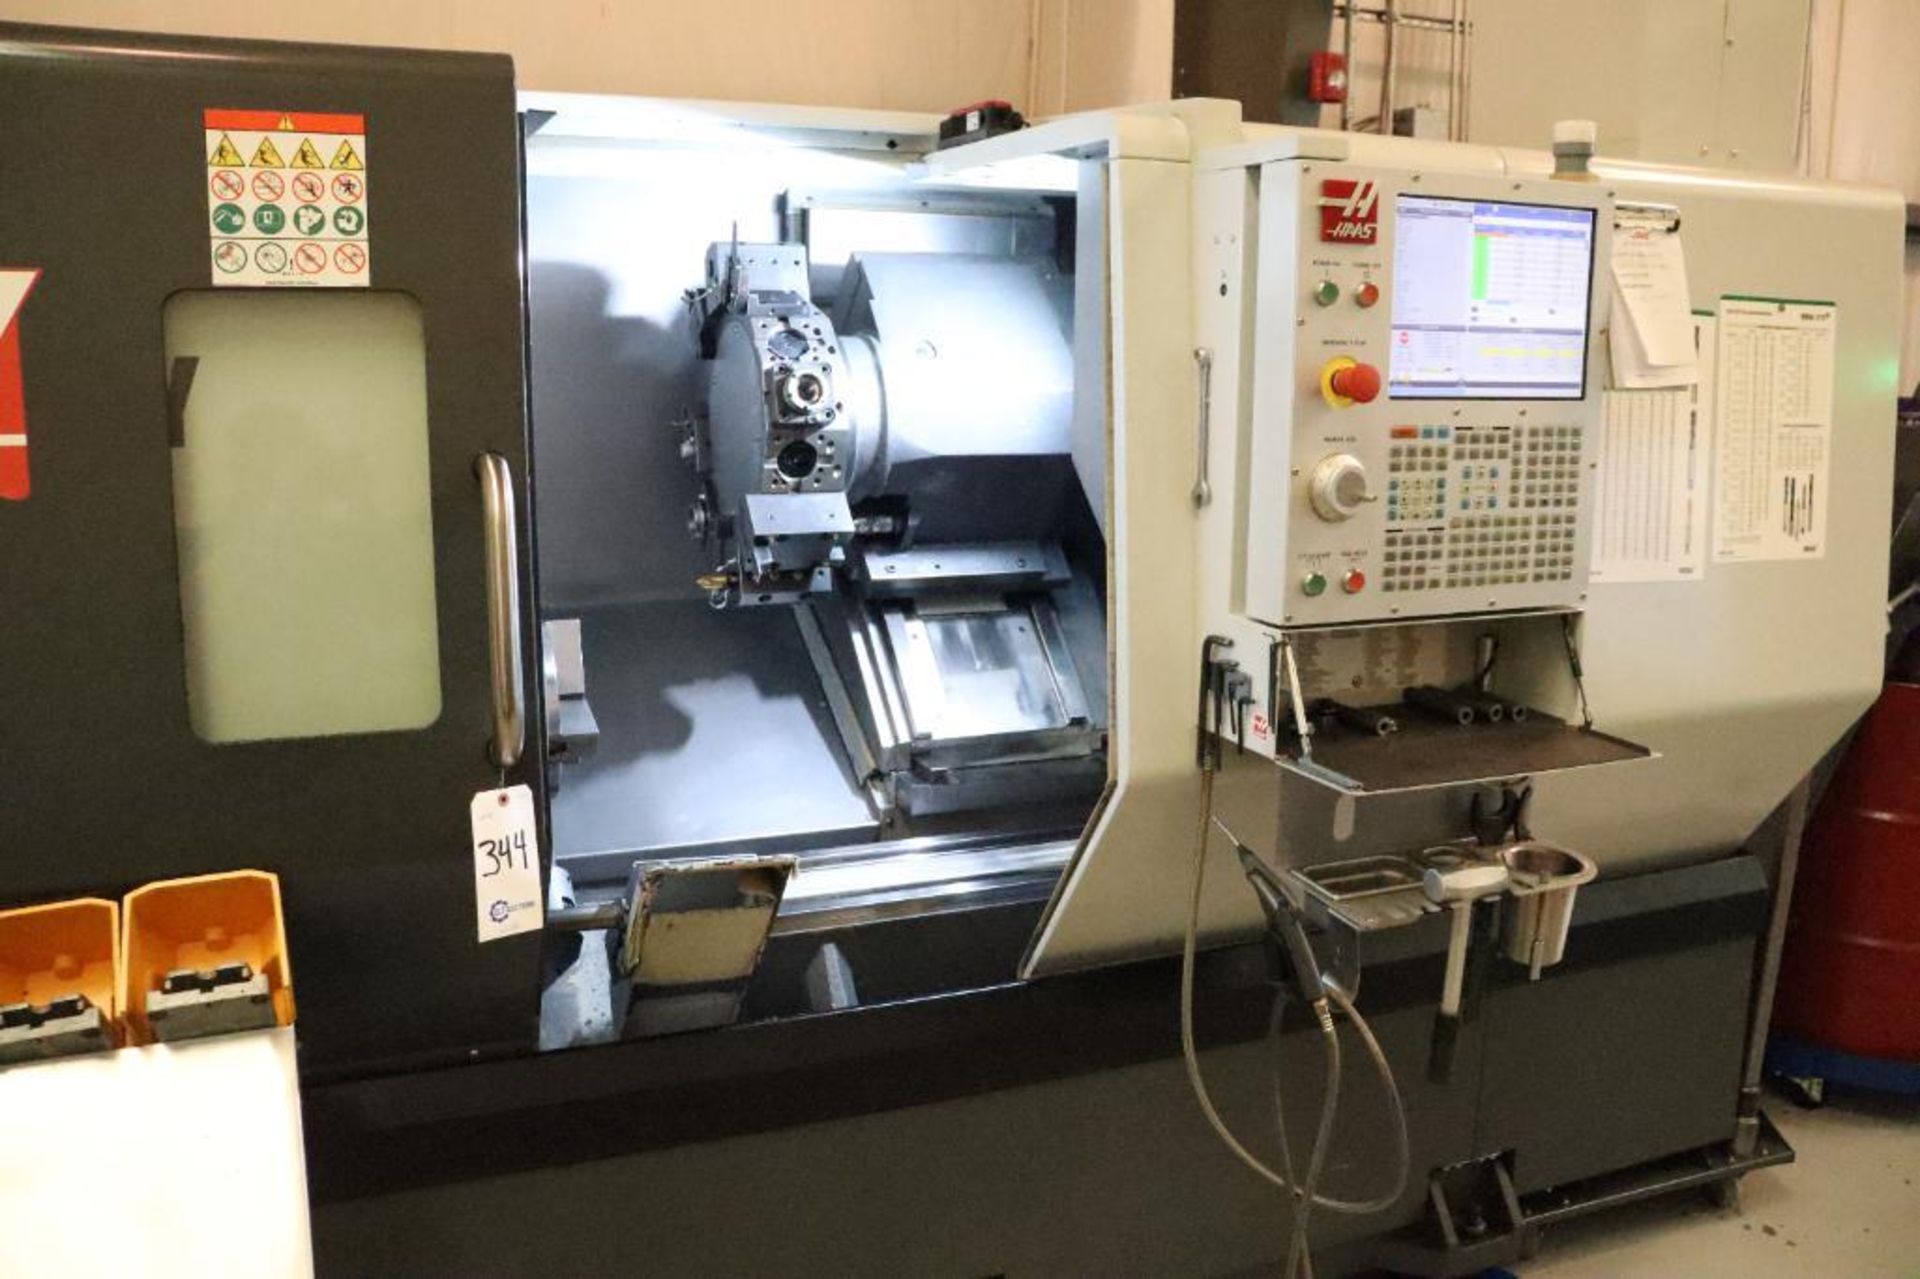 2021 Haas DS-30Y Dual Spindle Turning Center w/ bar feeder, Live tooling, Low hours! - Image 5 of 22